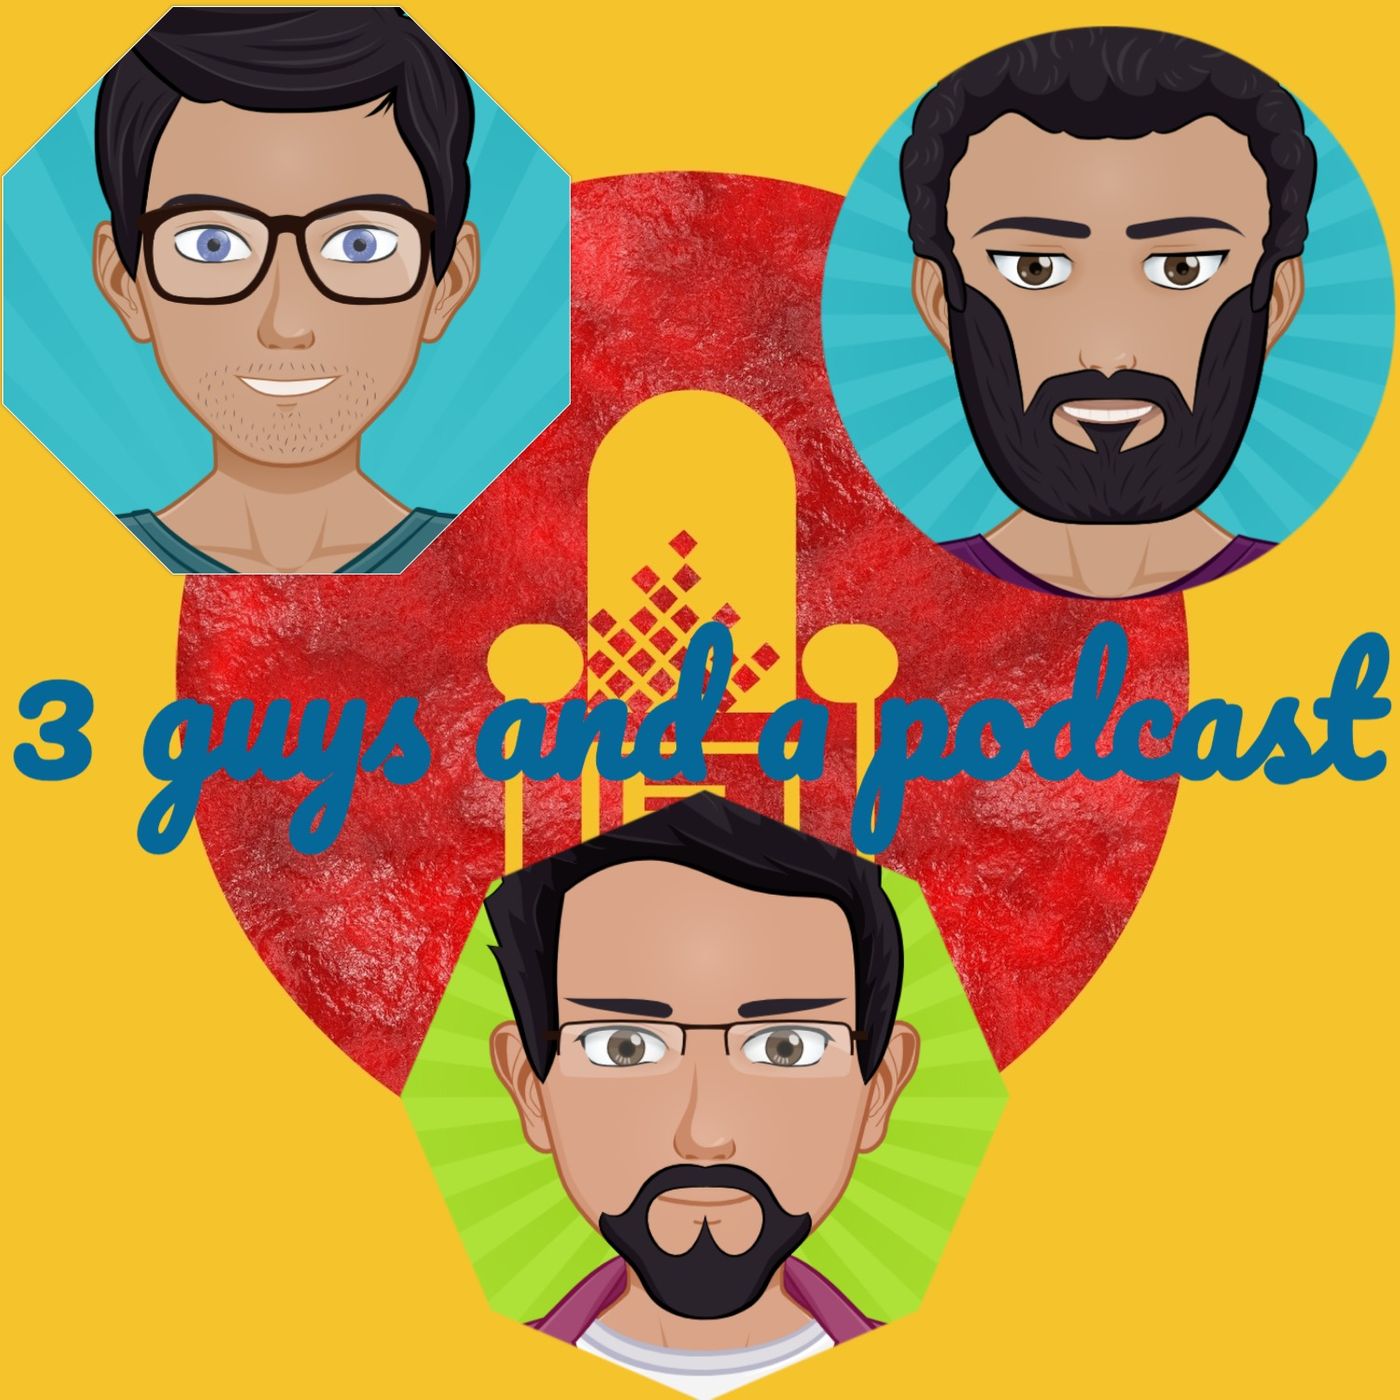 3 guys and a podcast